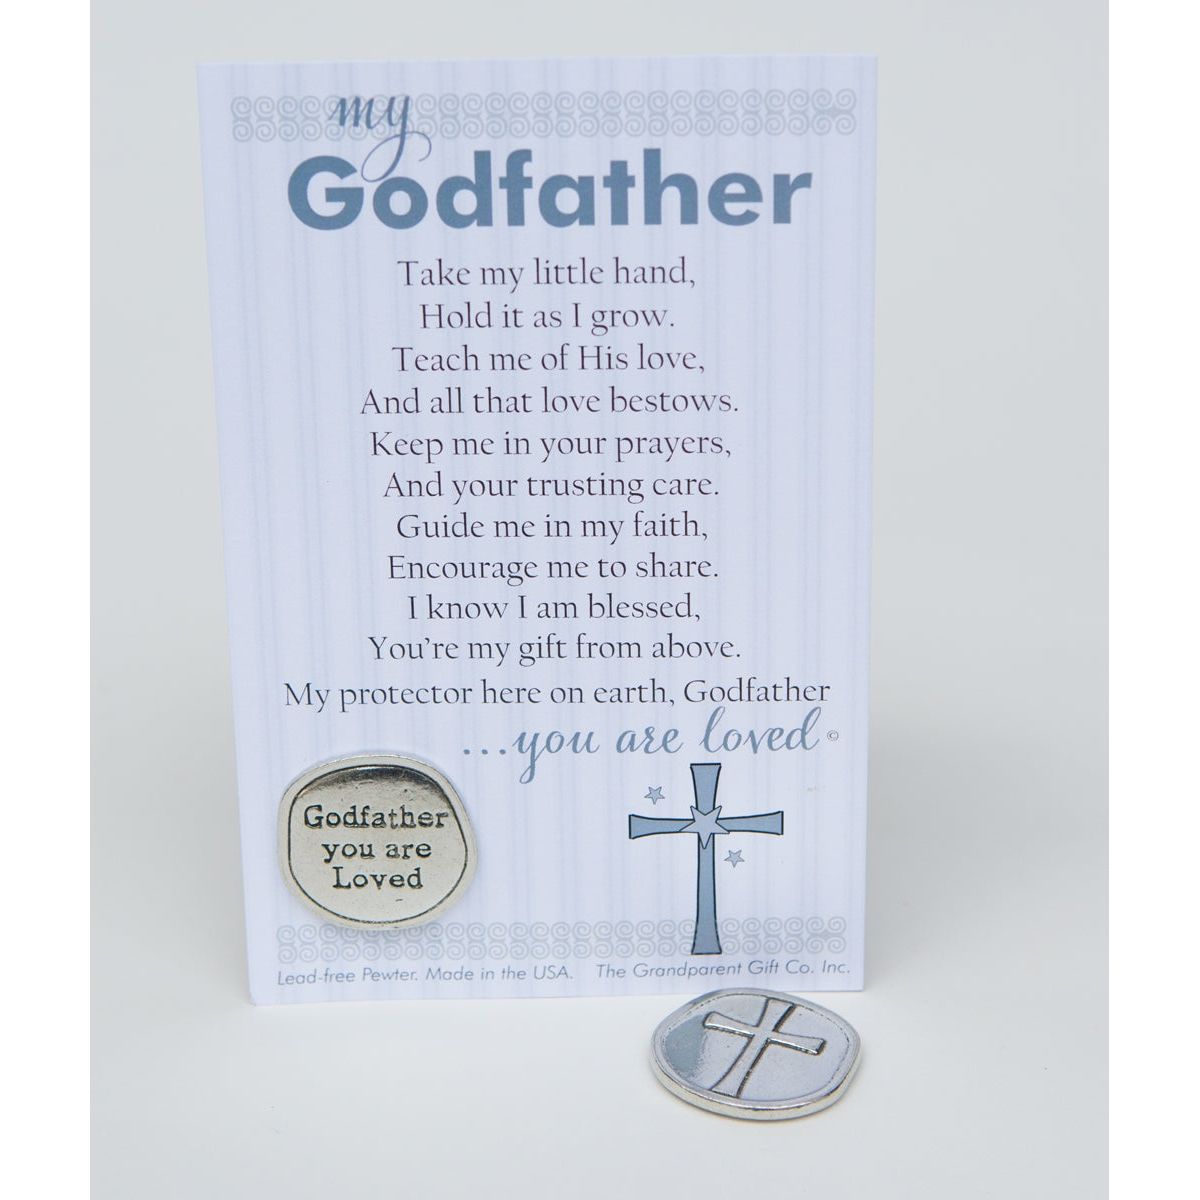 Godfather Gift: Handmade pewter coin with "Godfather you are Loved" on one side and a cross on the other, packaged in a clear bag with "My Godfather" poem.